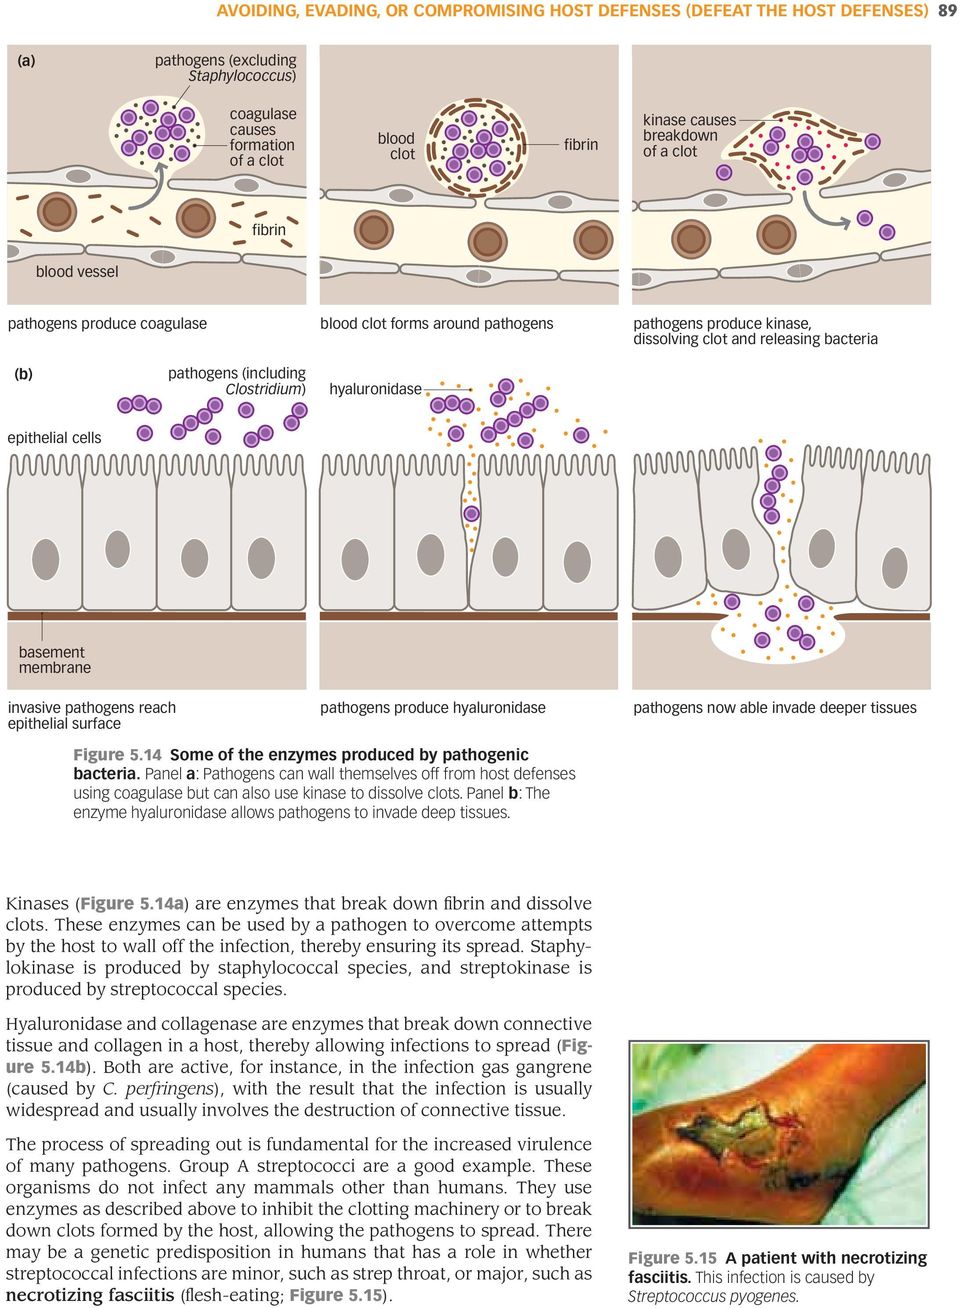 A description of the one celled creature necrotizing fasciitis caused by group a streptococcus